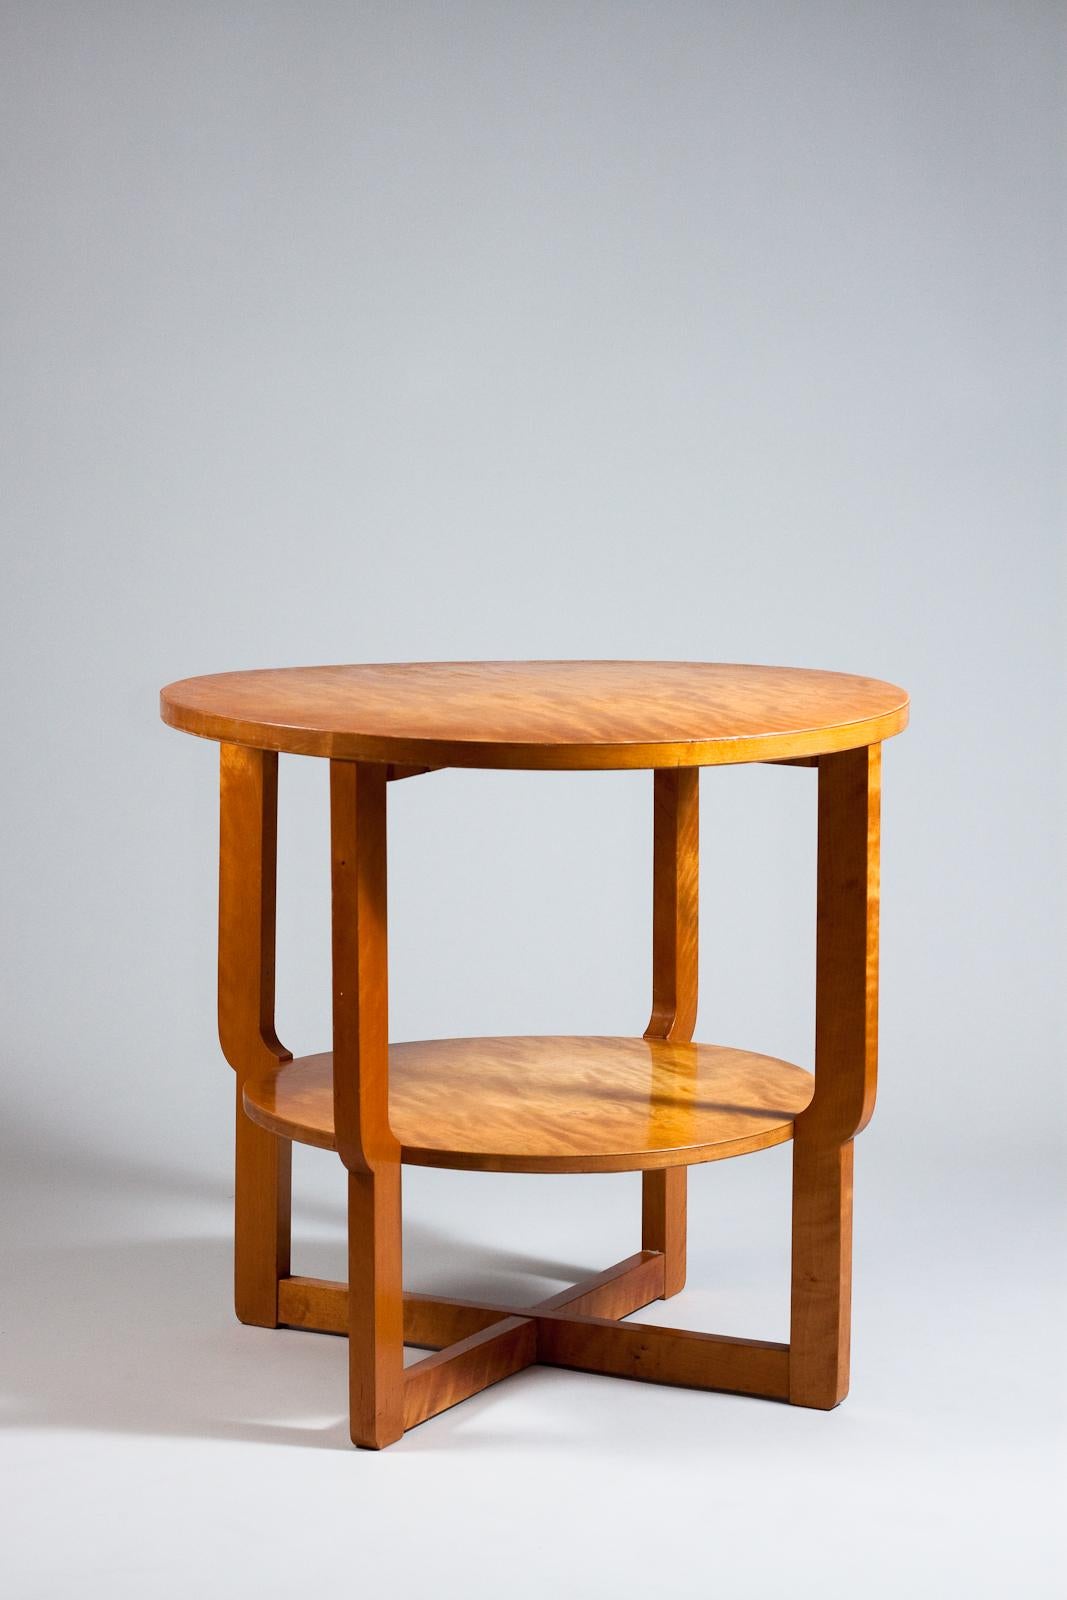 Introducing the Maija Heikinheimo, 1930's occasional table in birch - a delightful addition to any vintage designer furniture collection. Expertly crafted and finished in a striking birch tone, this stylish table is perfect for adding a touch of